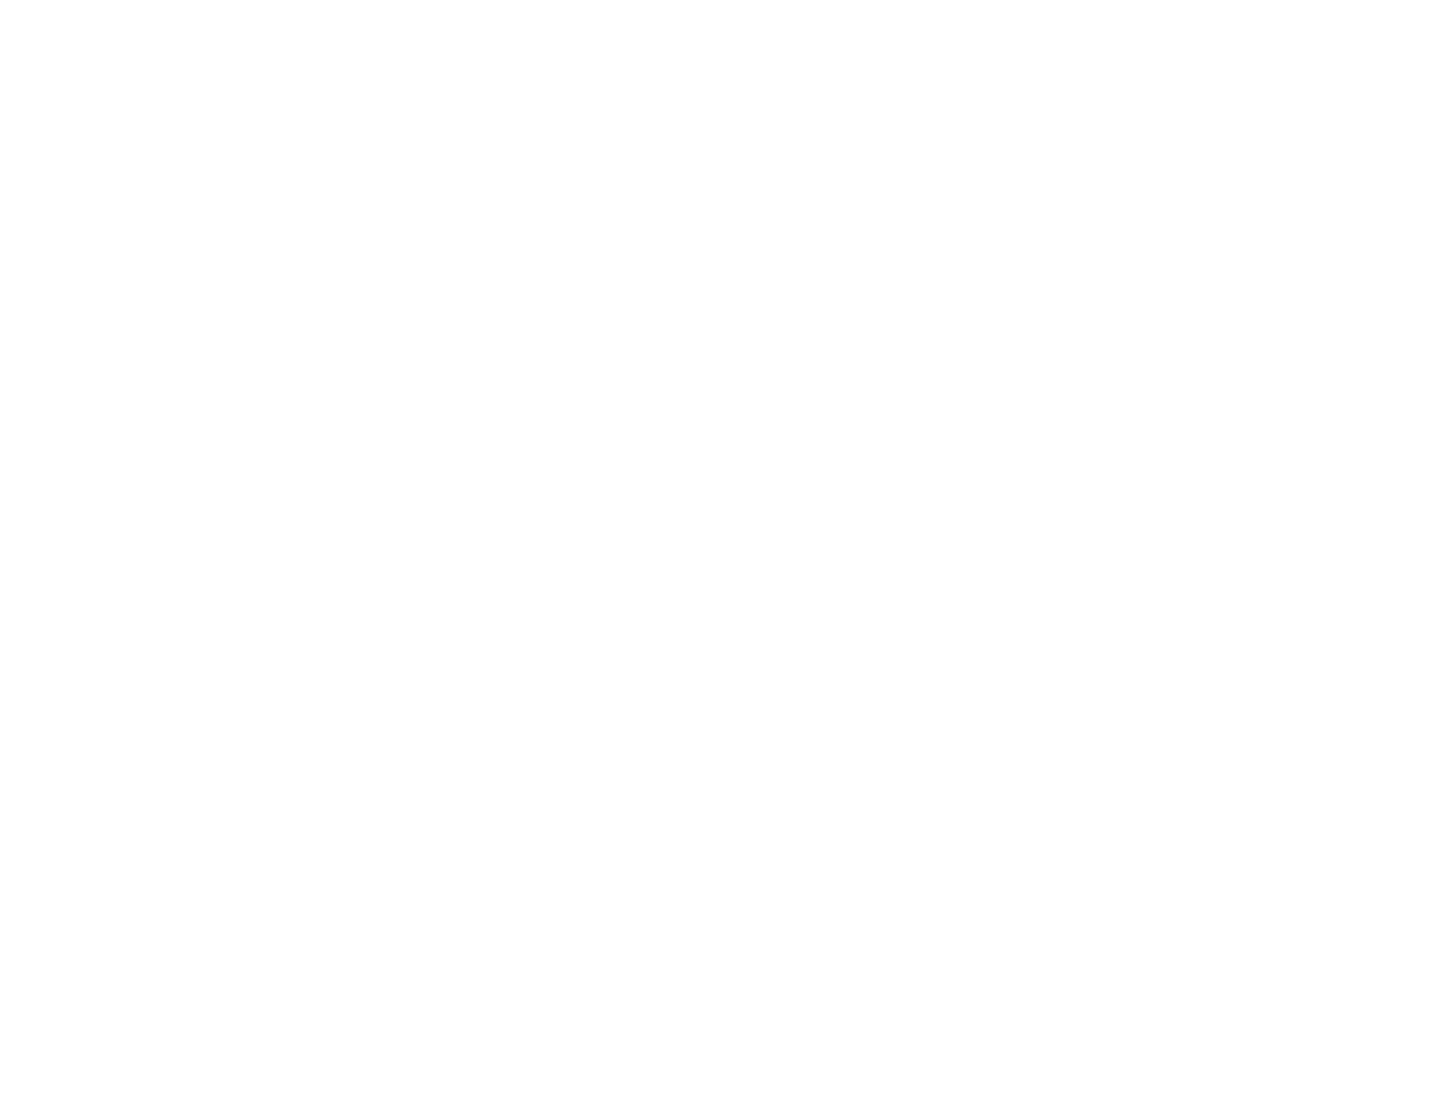 Kris McLaughlin - The Mindful Agent